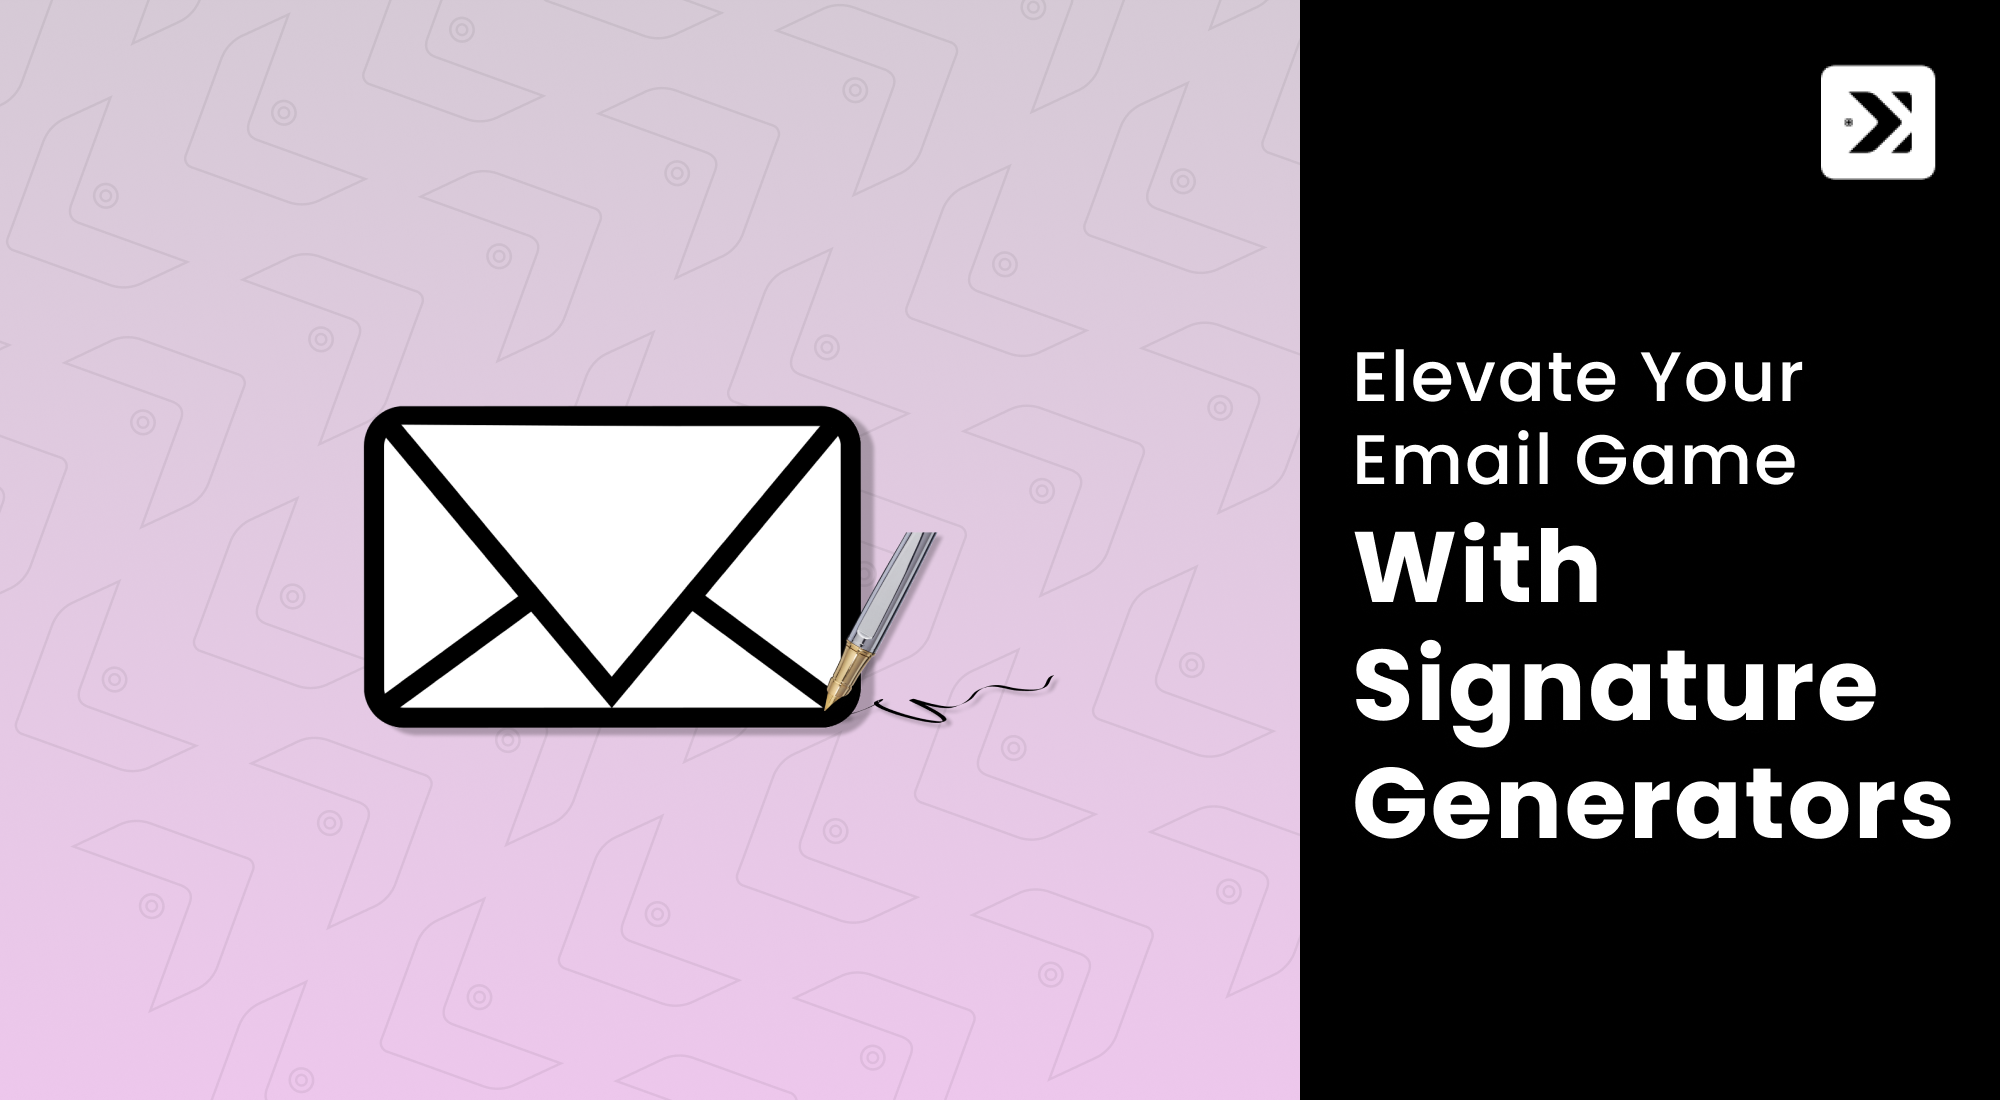 Elevate Your Email Game with These Top 5 Email Signature Generators